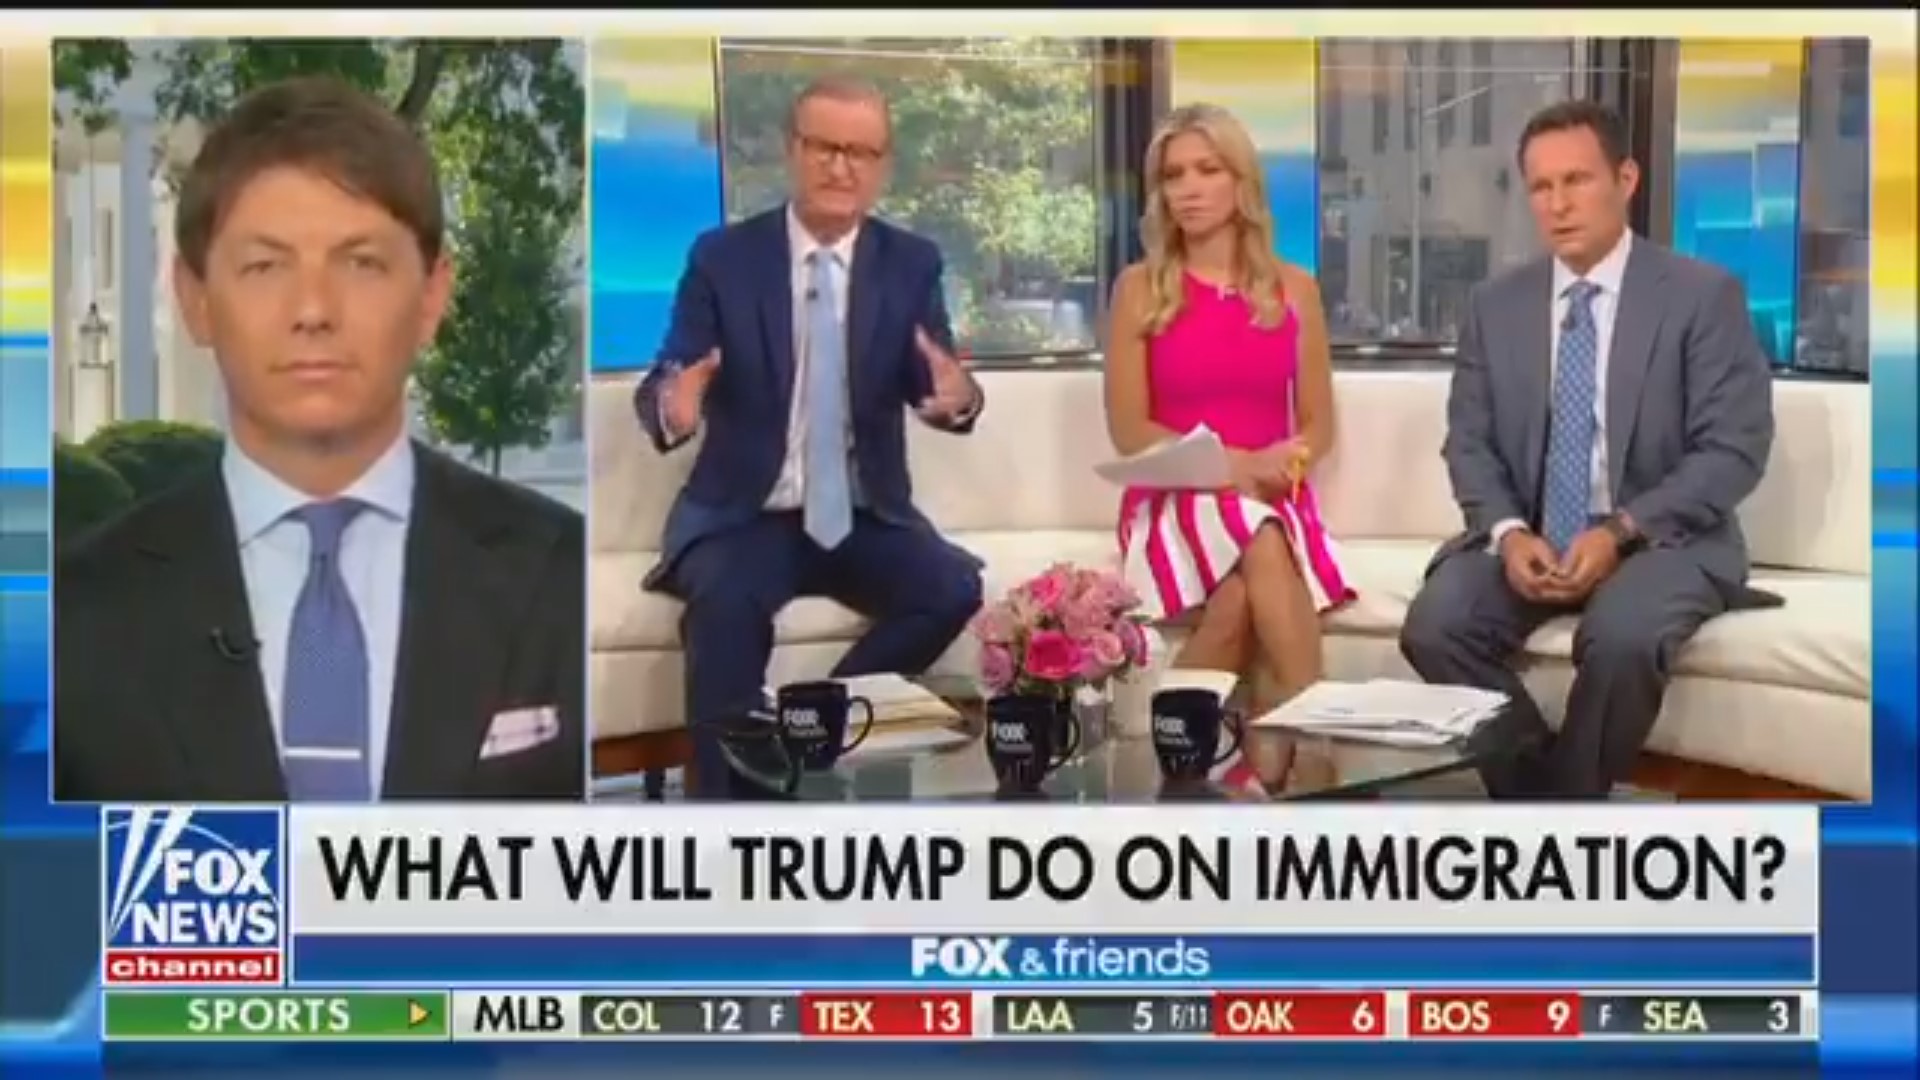 Fox’s Steve Doocy Objects To Use Of Term ‘Cages’: They’re ‘Walls’ Made Of ‘Chain-Link Fences’